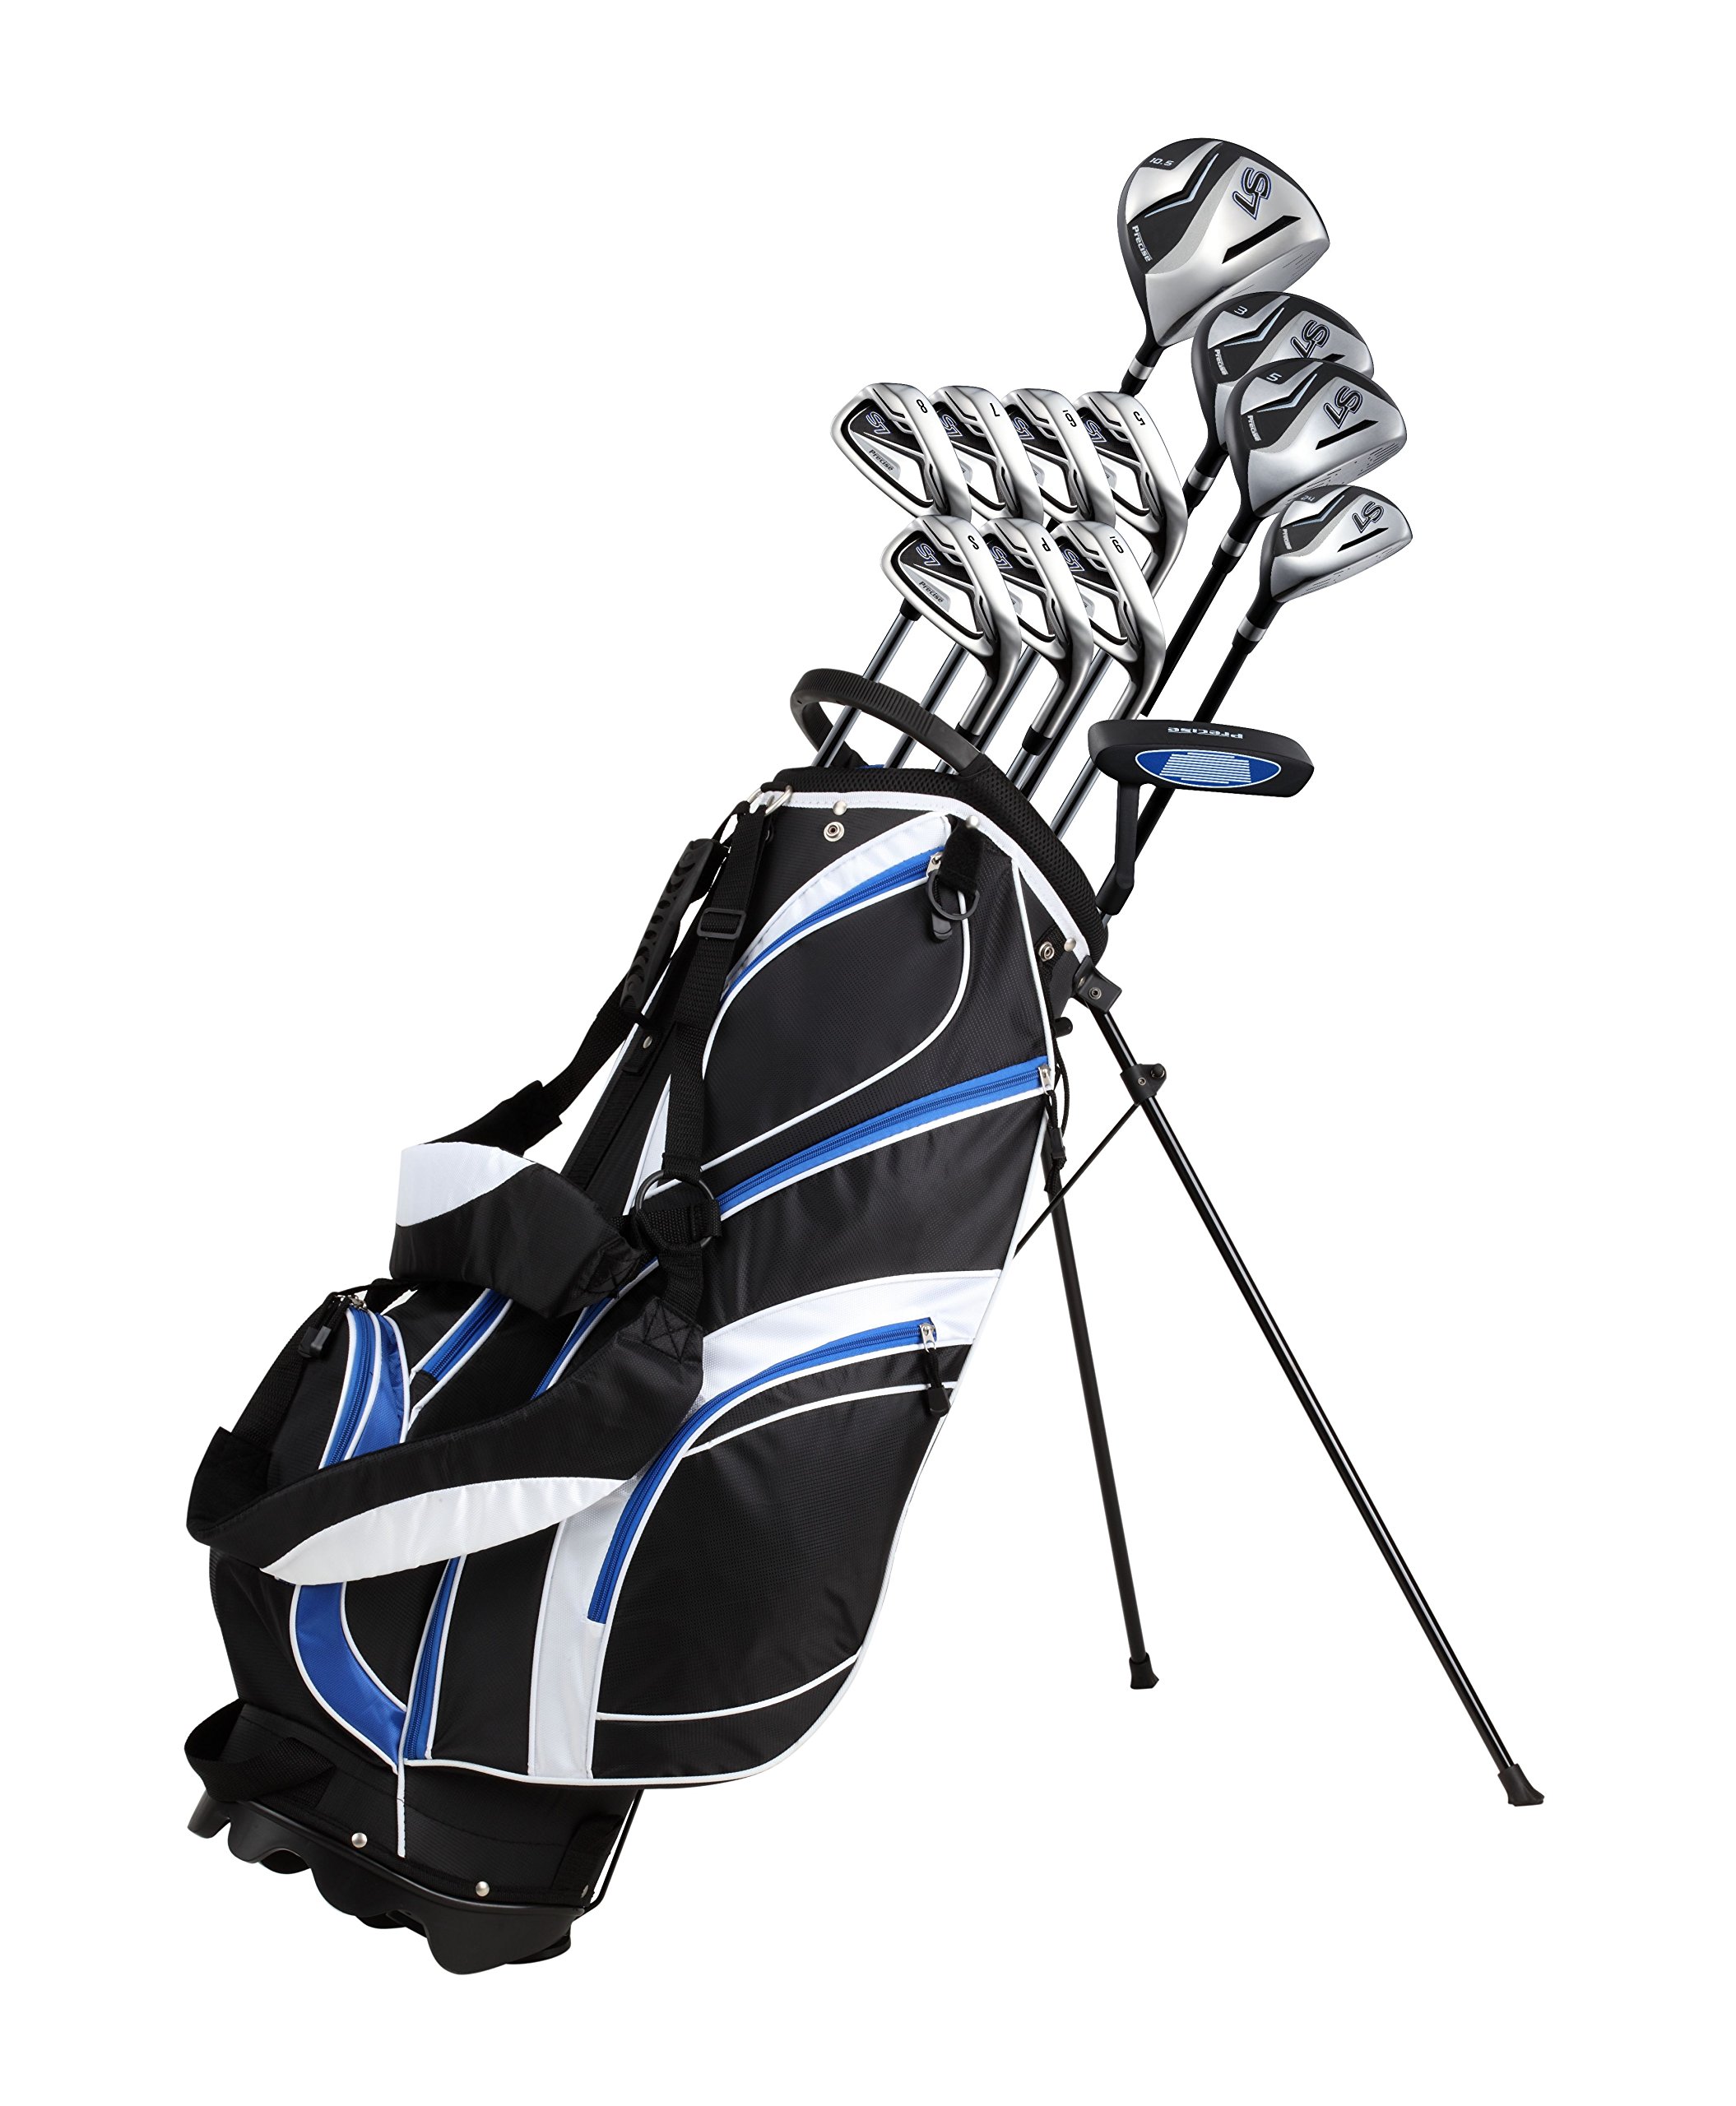 Mua 18 Piece Men's Complete Golf Club Package Set With Titanium Driver, #3  & #5 Fairway Woods, #4 Hybrid, 5-SW Irons, Putter, Stand Bag, 4 H/C's -  Choose Color & Size trên